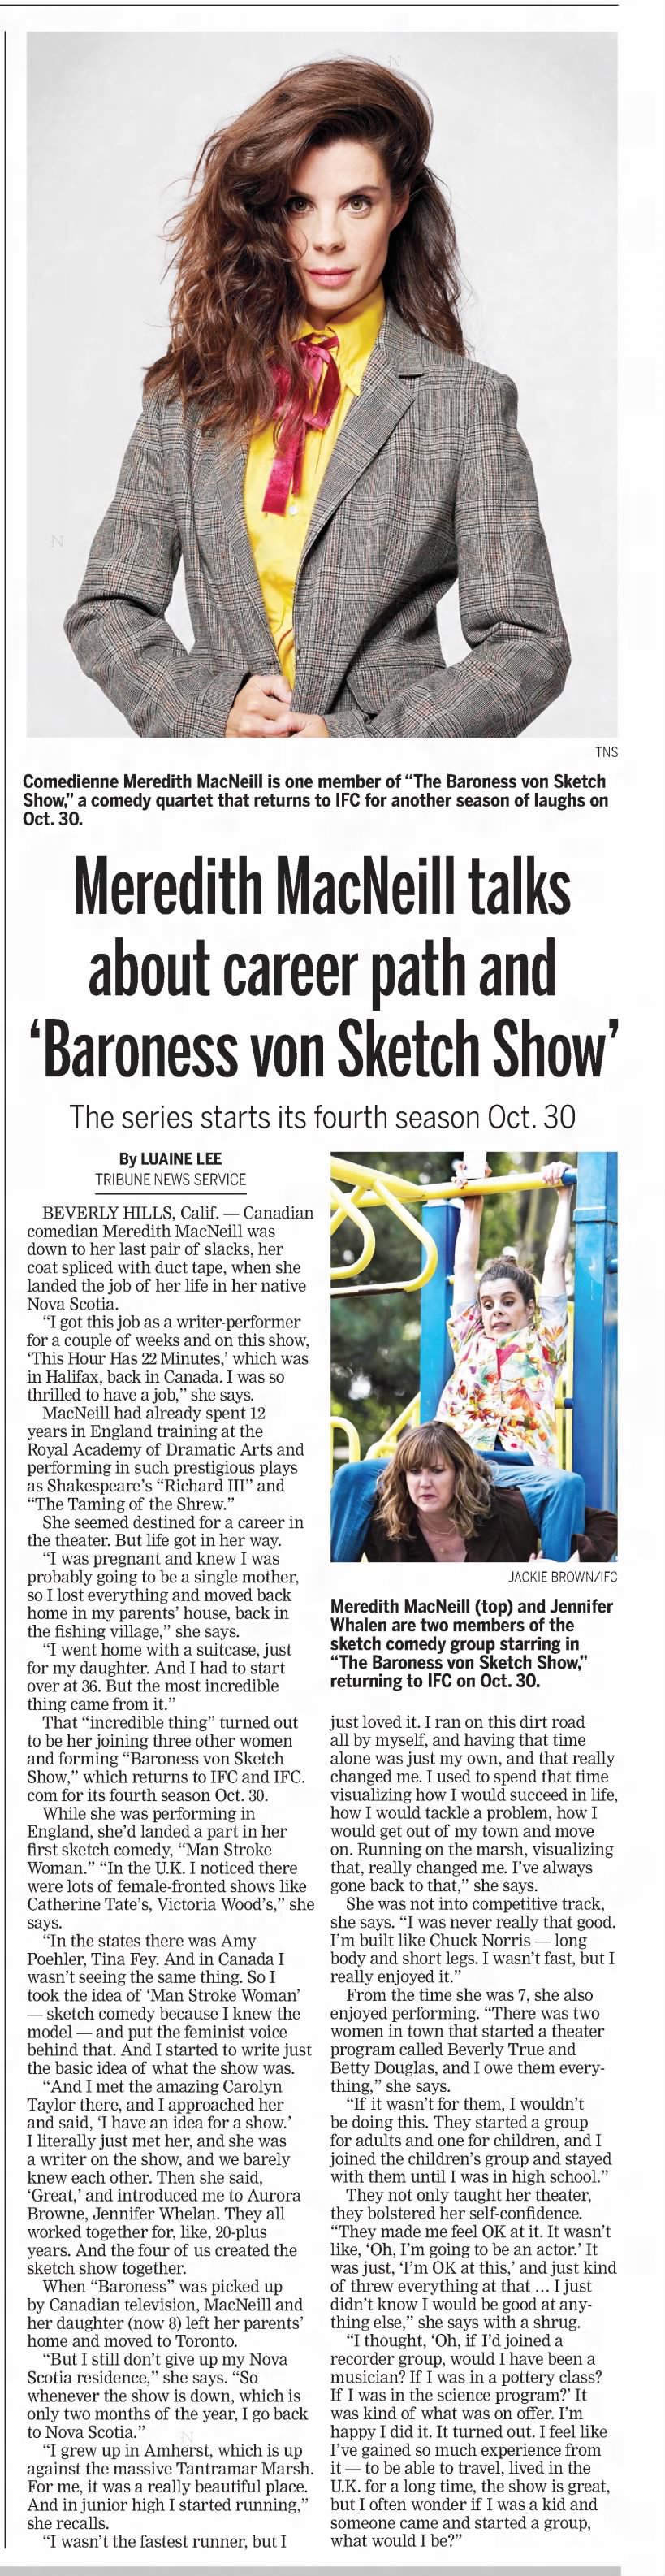 Meredith MacNeill talks about career path and Baroness von Sketch Show/Luaine Lee